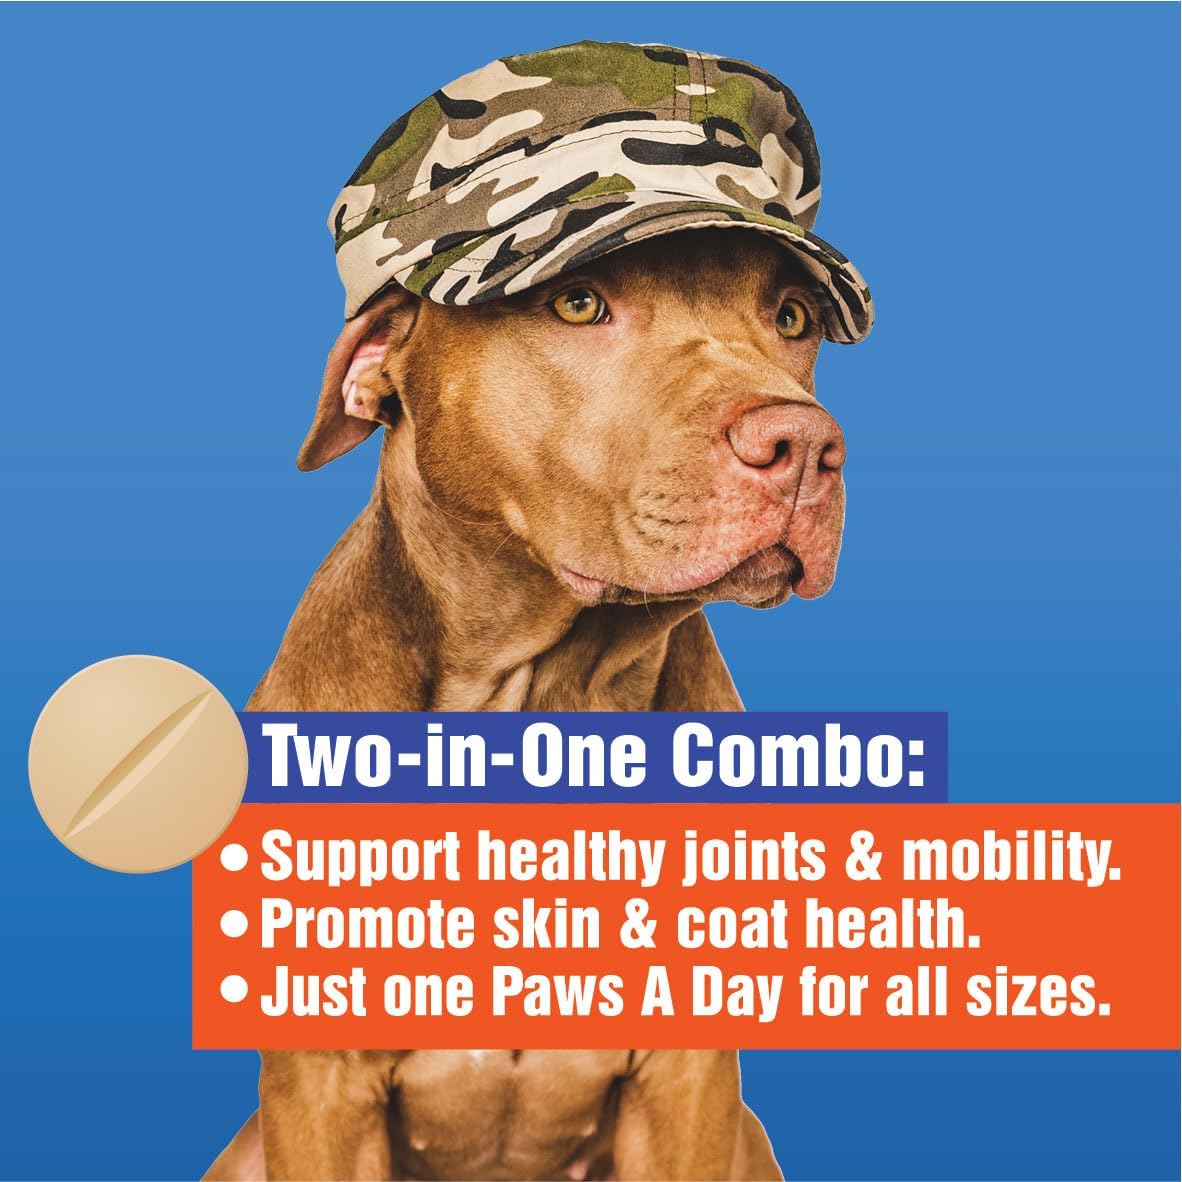 Paws A Day Glucosamine for Dogs Hip & Joint Supplement – “Two-in-One Combo” Dog Joint Care and Improved Skin & Coat with Chondroitin, MSM, Omega 3, Collagen & Biotin, 60 Chewable Tablets (2 Months)